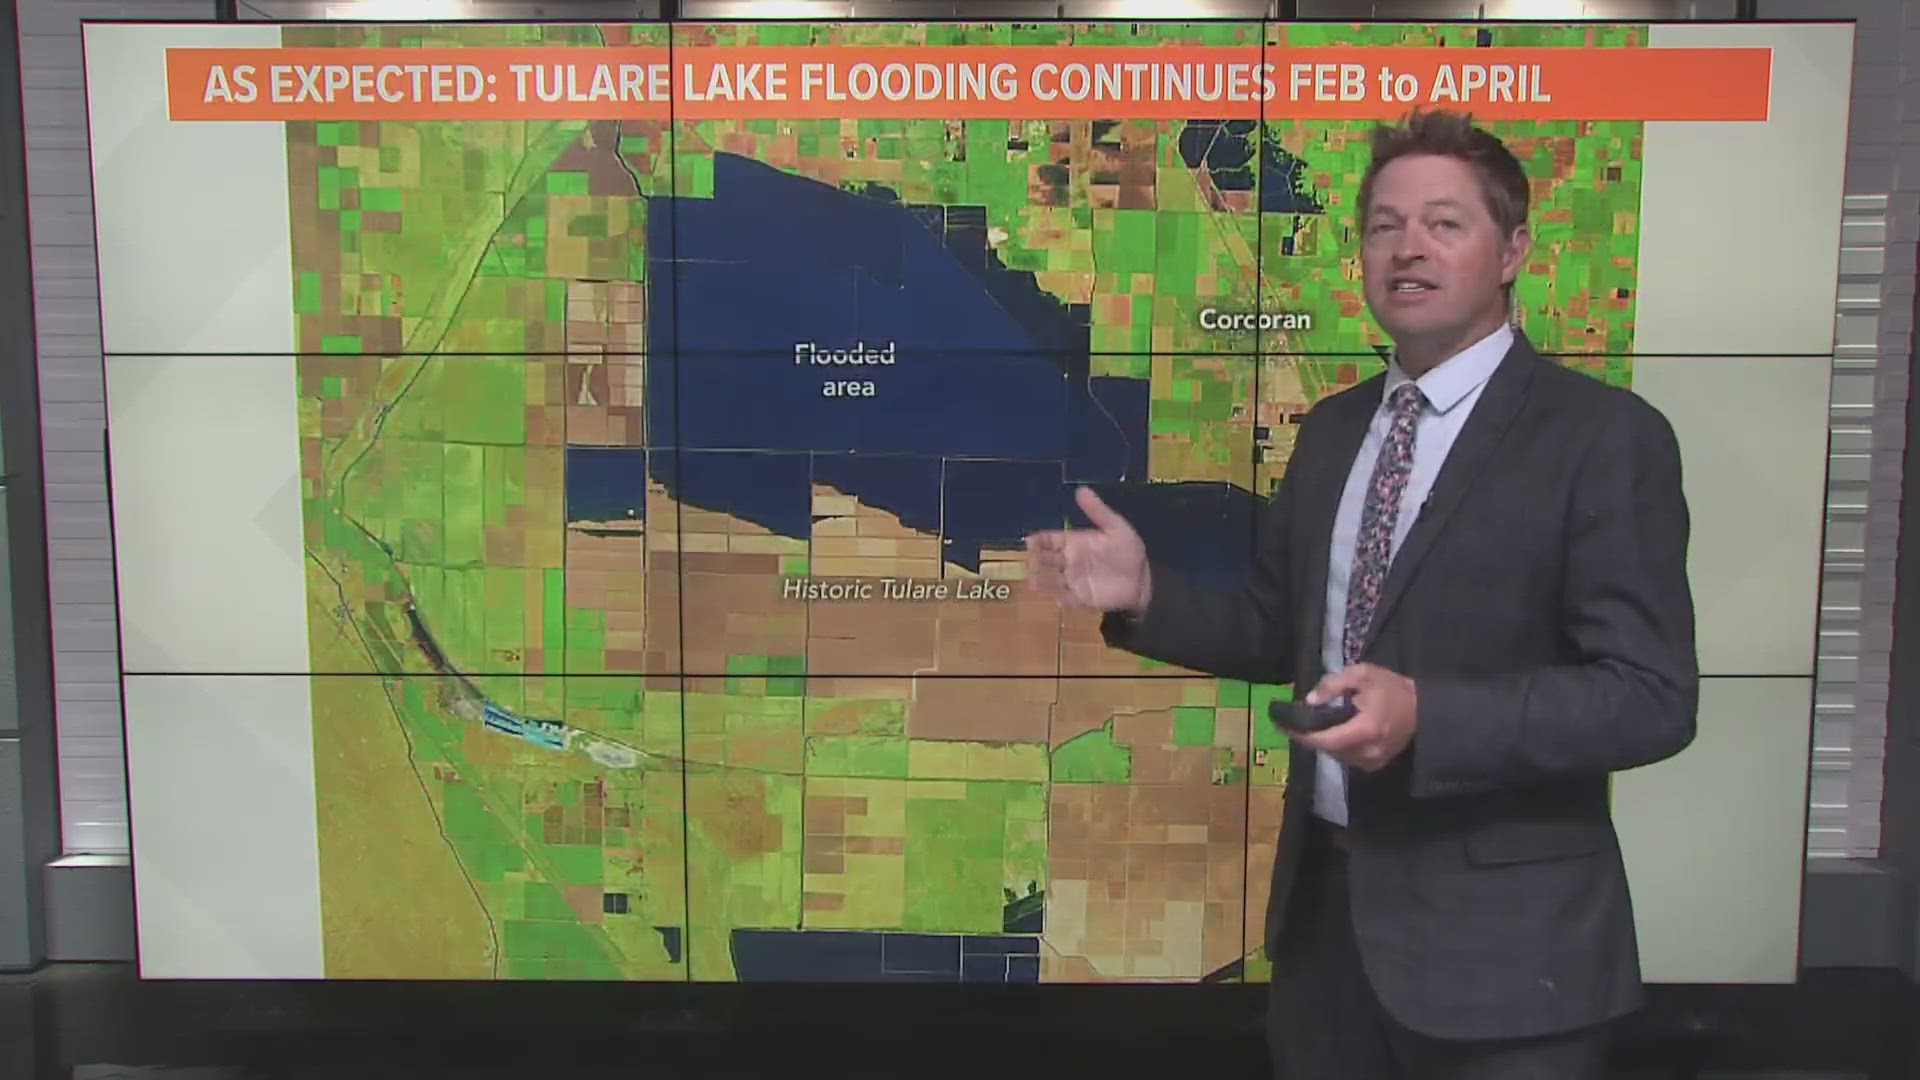 The historic Tulare Lake saw flooding throughout Spring 2023, as seen by satellite imagery described by our Rob Carlmark.